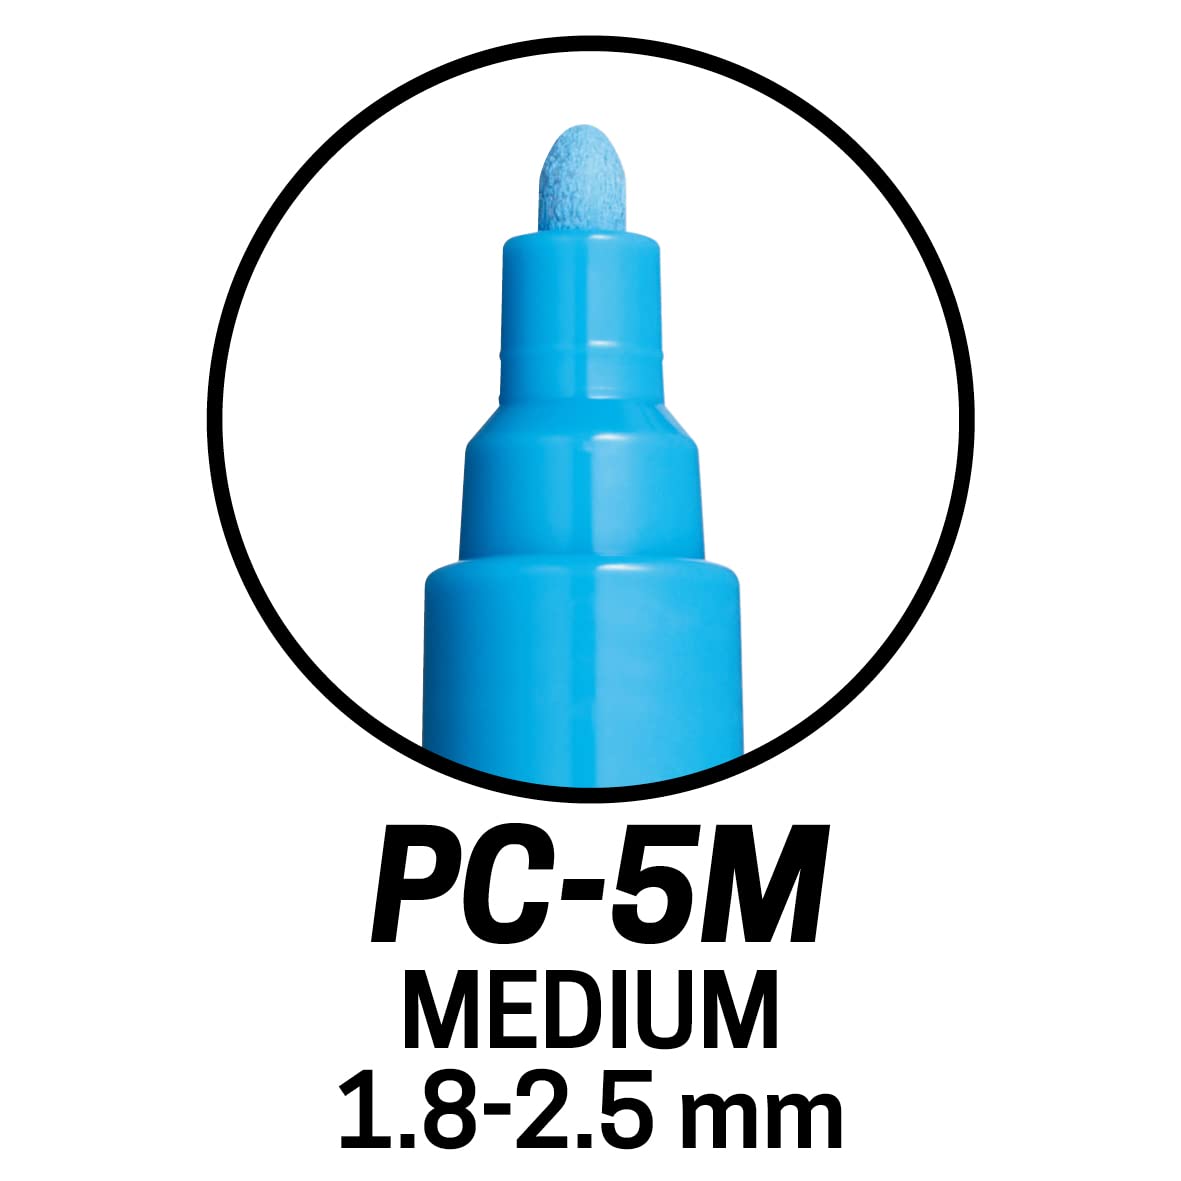 Posca PC-5M Water Based Permanent Marker Paint Pens. Medium Tip for Art & Crafts. Multi Surface Use On Wood Metal Paper Canvas Cardboard Glass Fabric